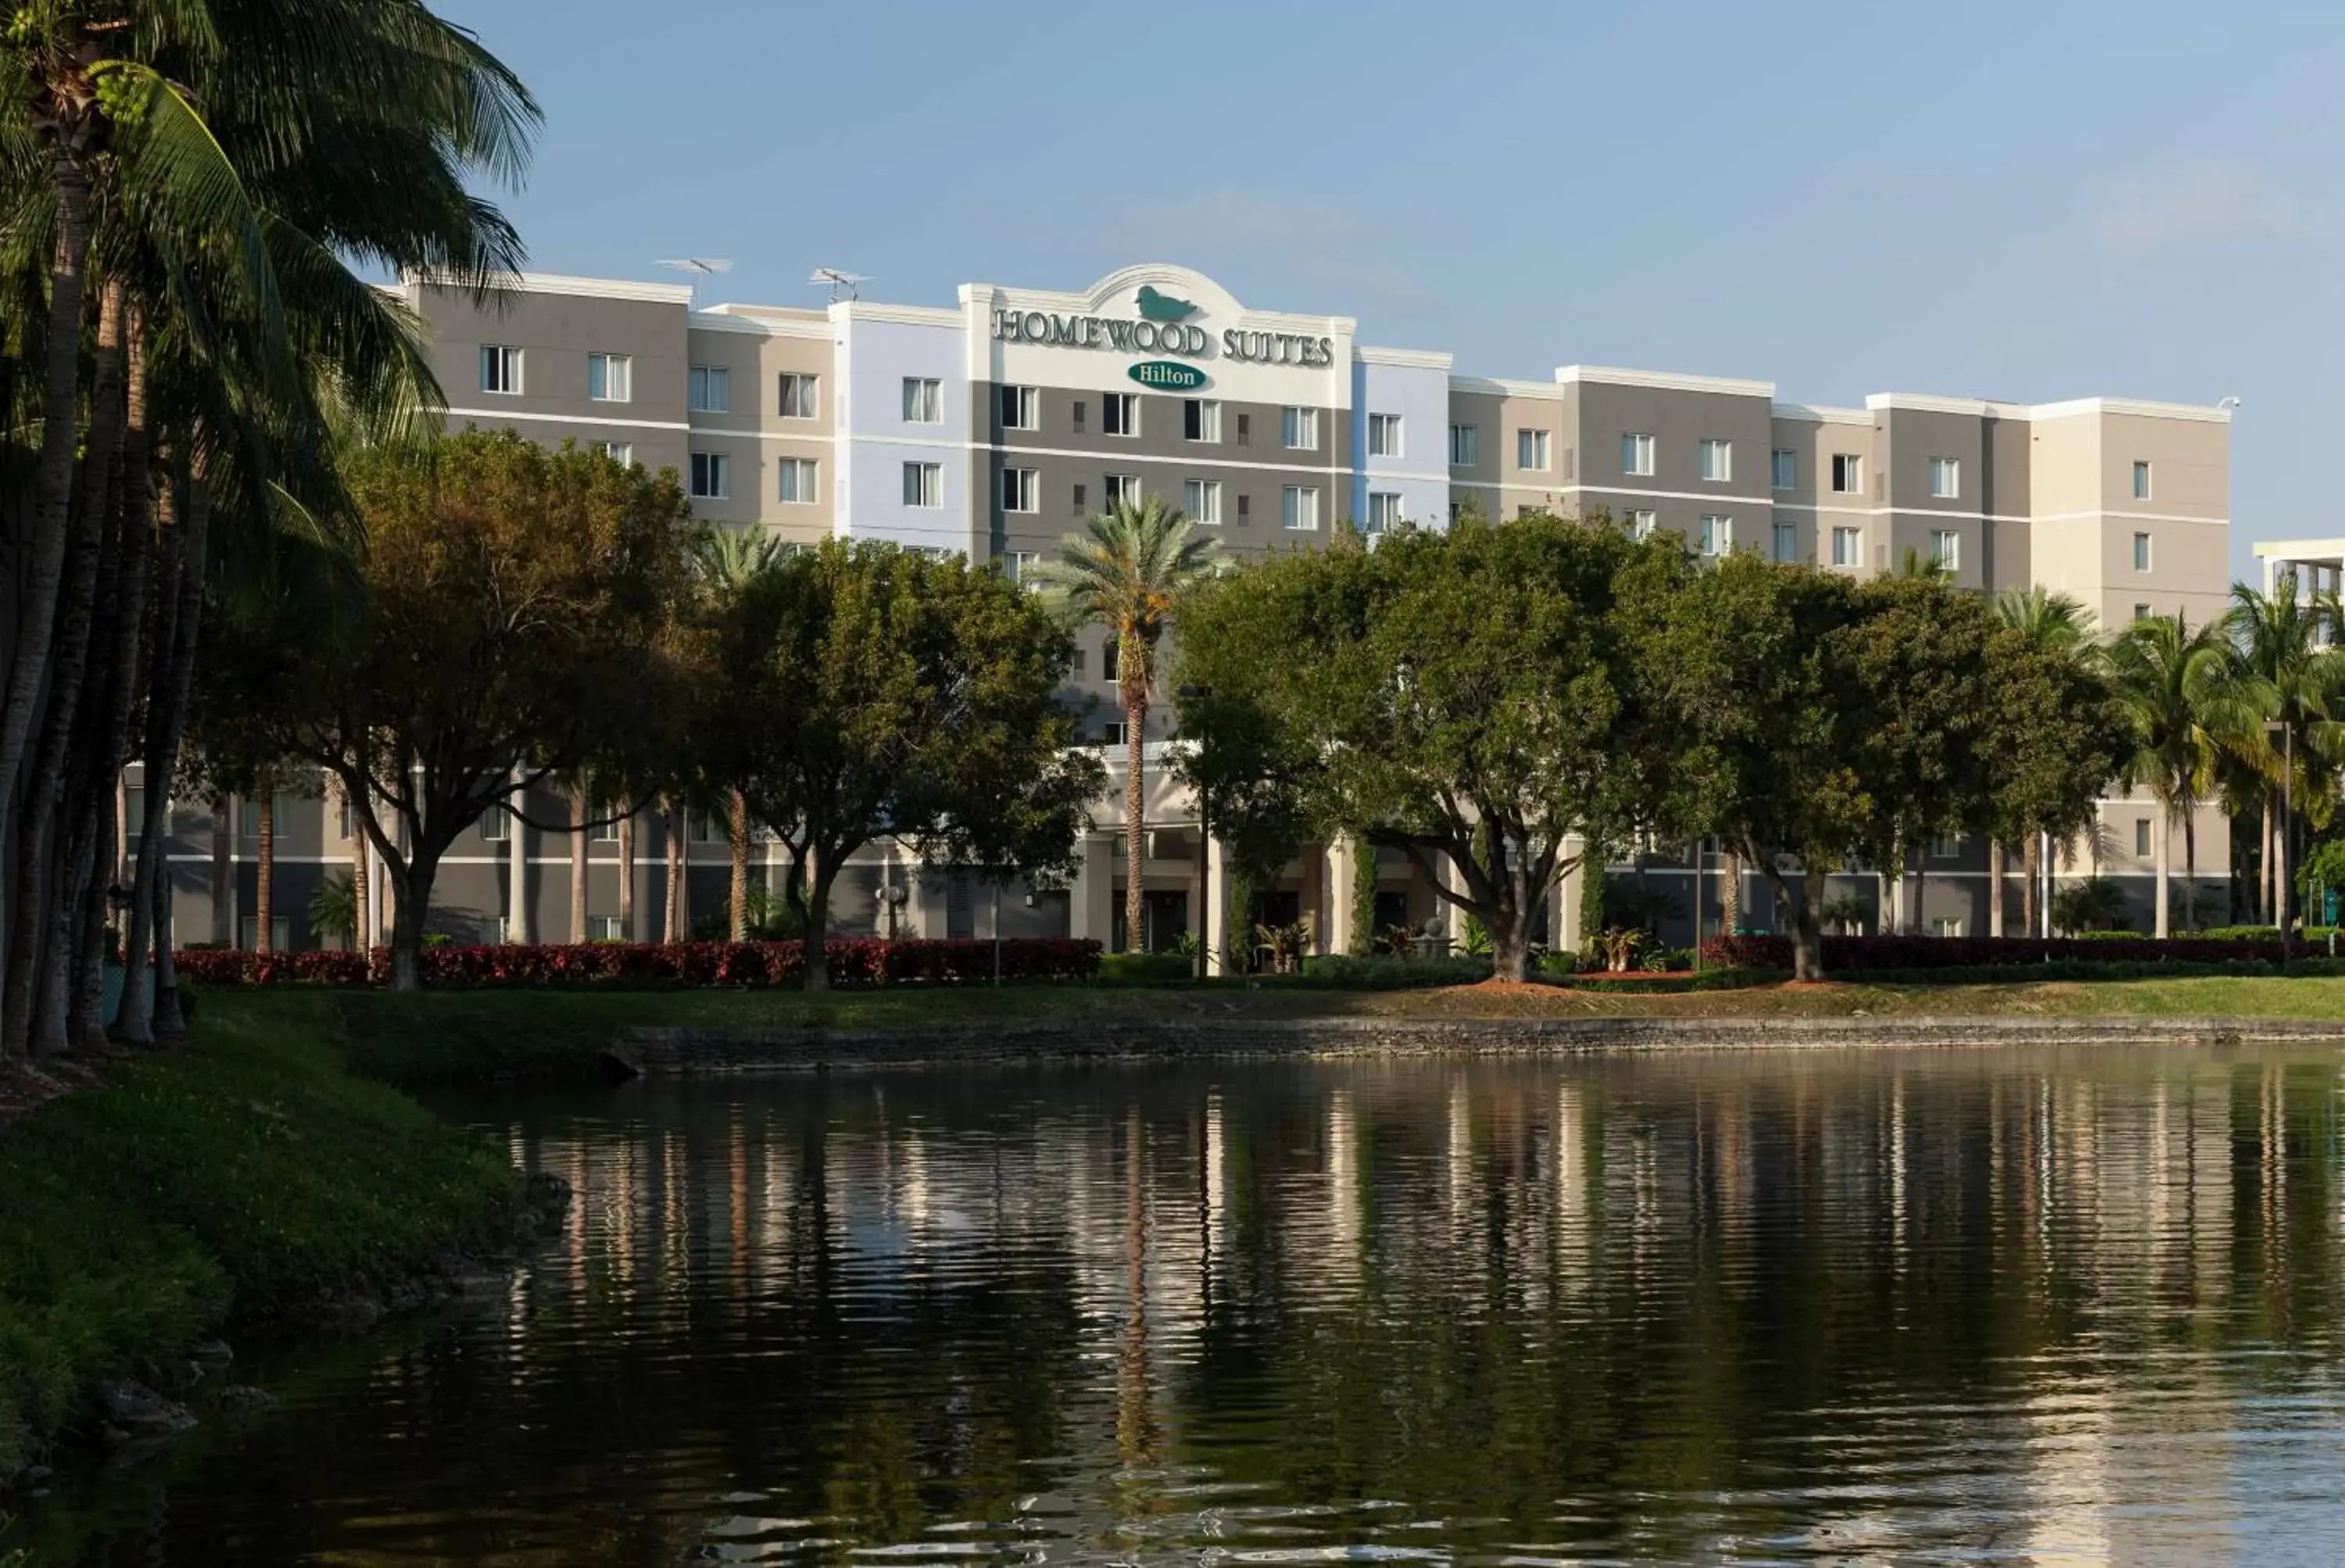 Property Building in Homewood Suites Miami Airport/Blue Lagoon